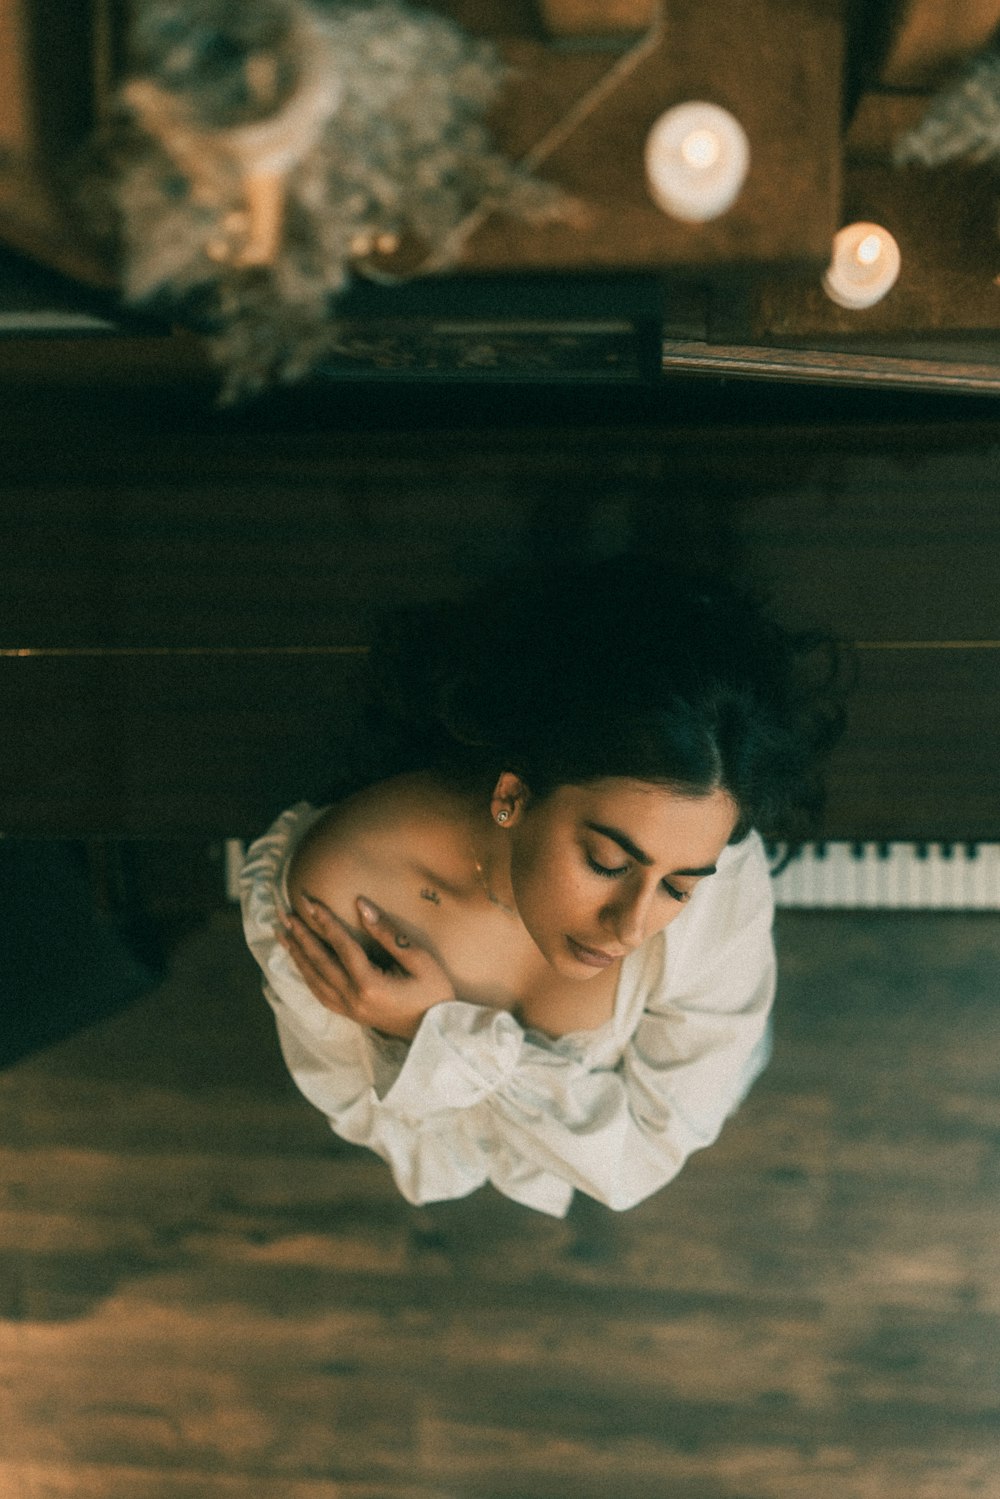 a woman sitting at a piano looking down